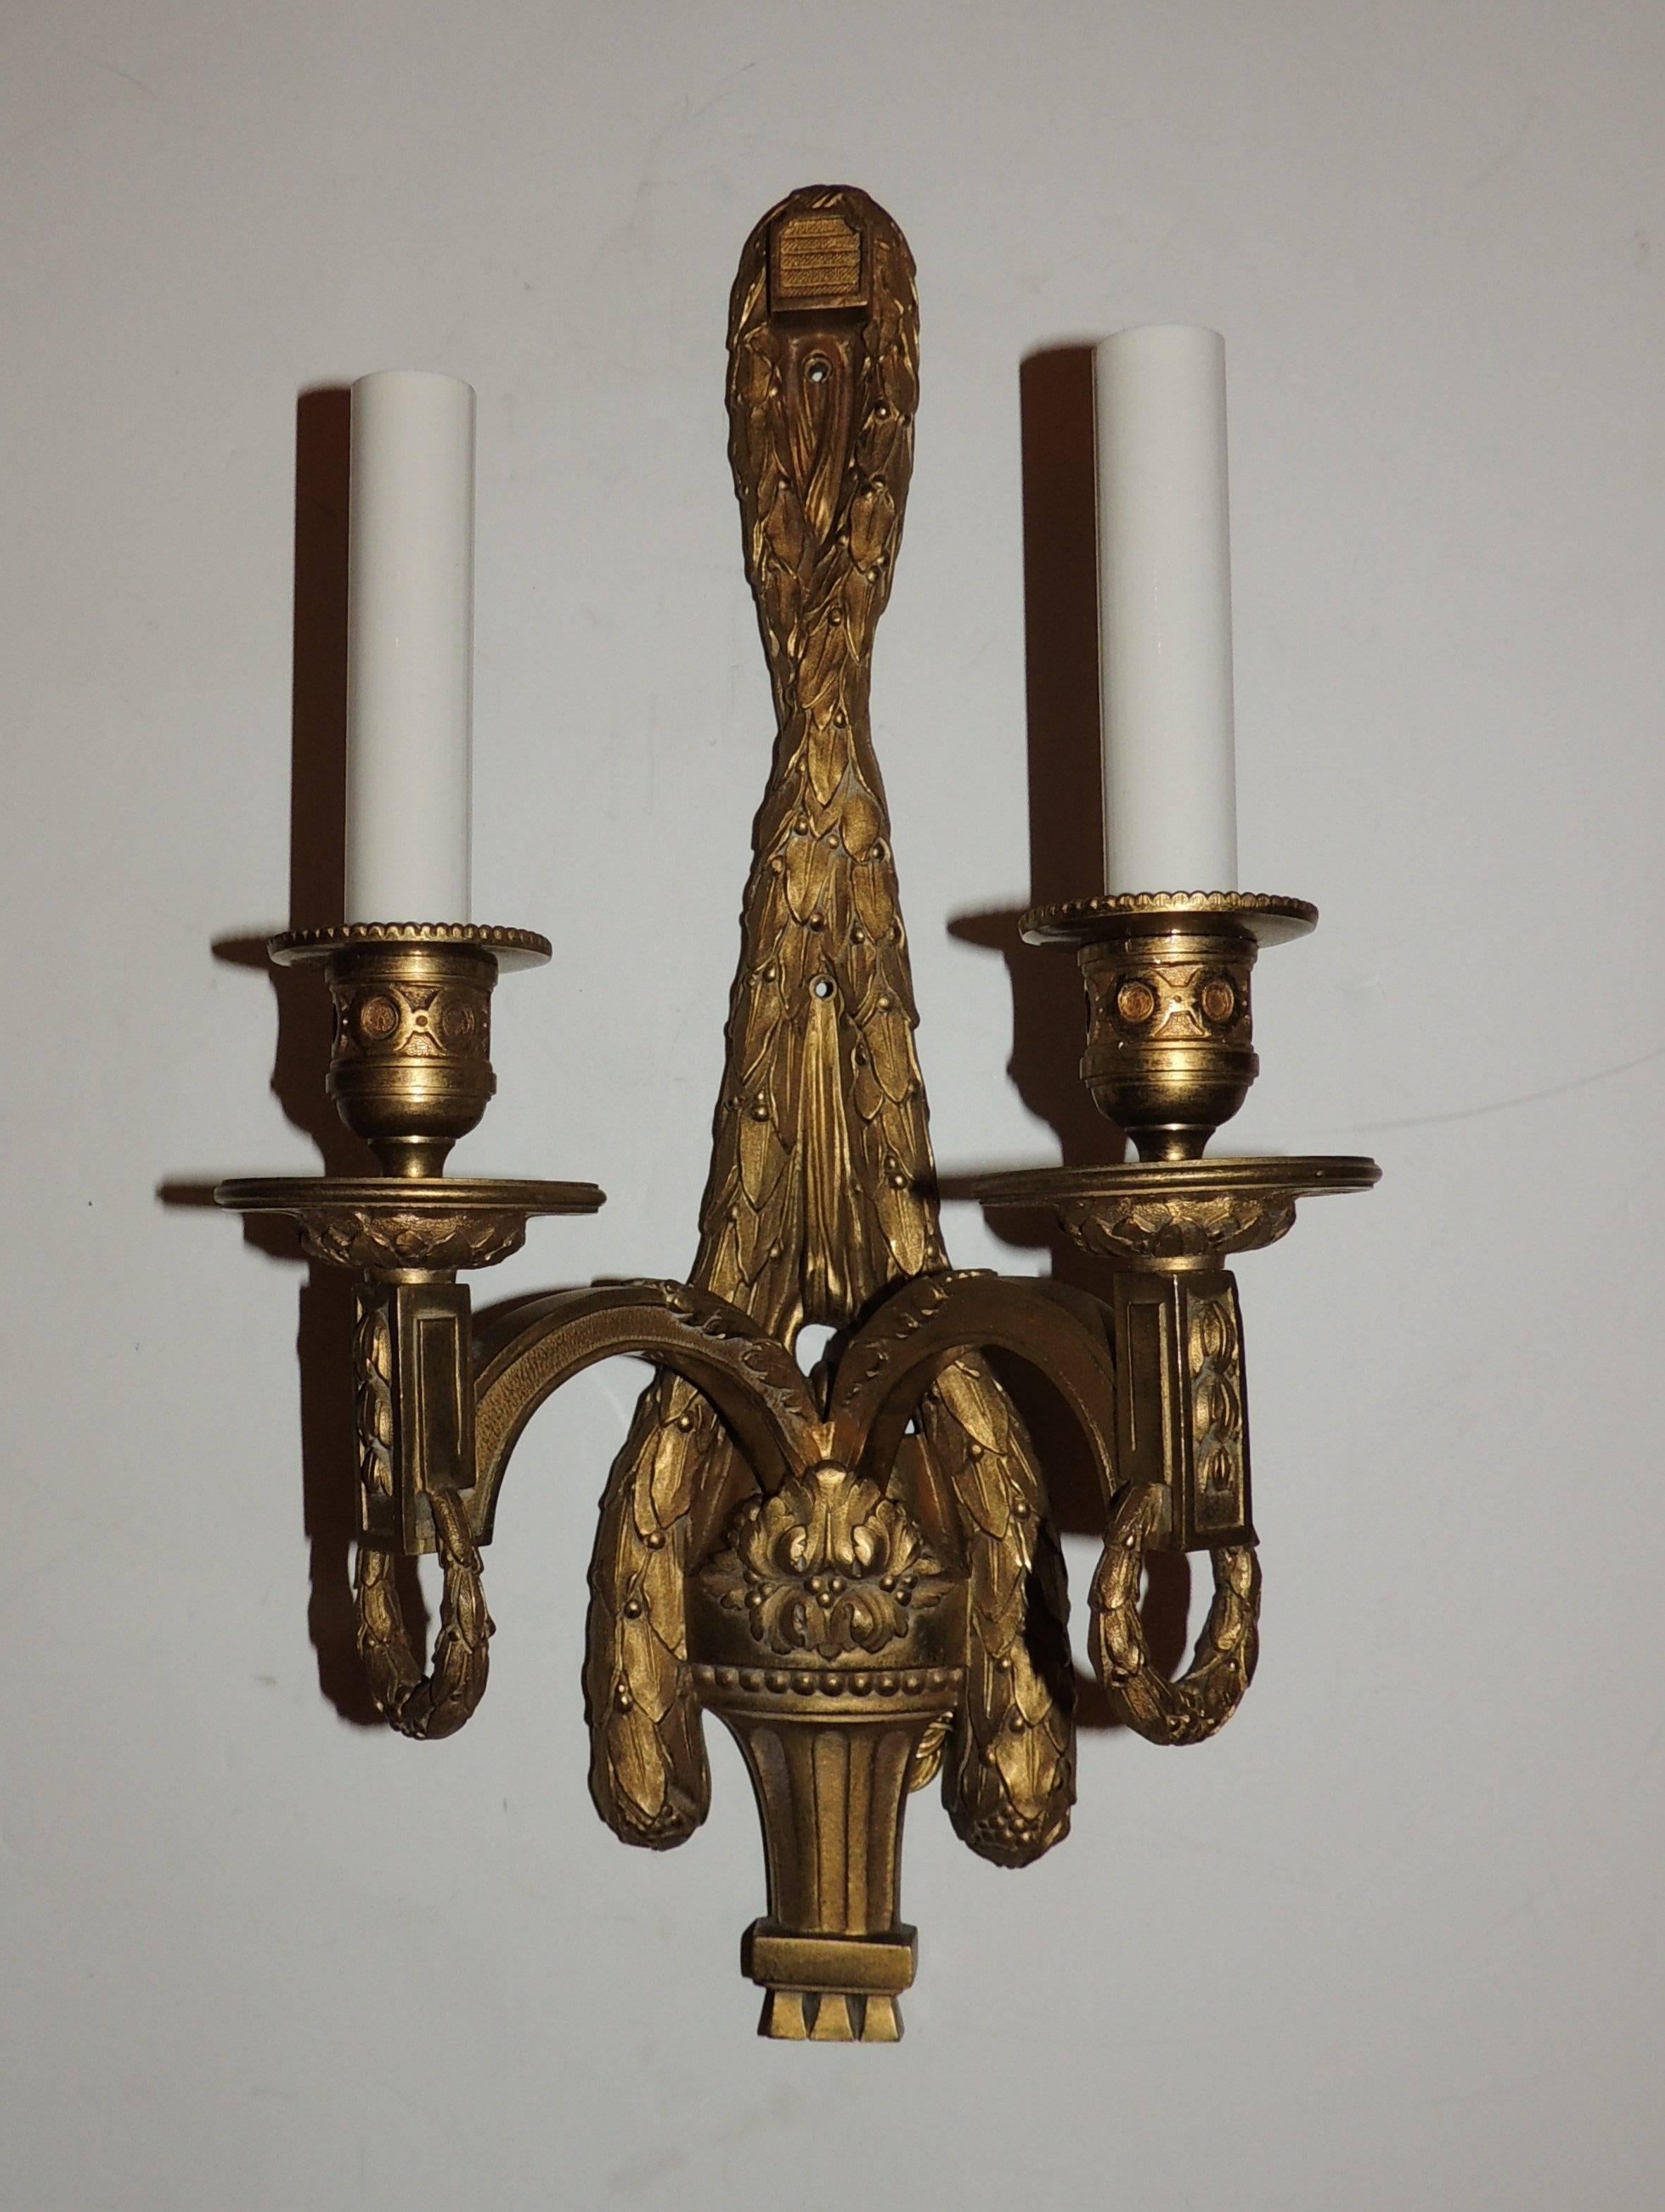 A very fine quality and elegant pair of gilt bronze French style two arm swag draped sconces with wreaths hanging from the arms. The candle cups and bobeches are beautifully decorated.  

15"H X 8"W X 4"D